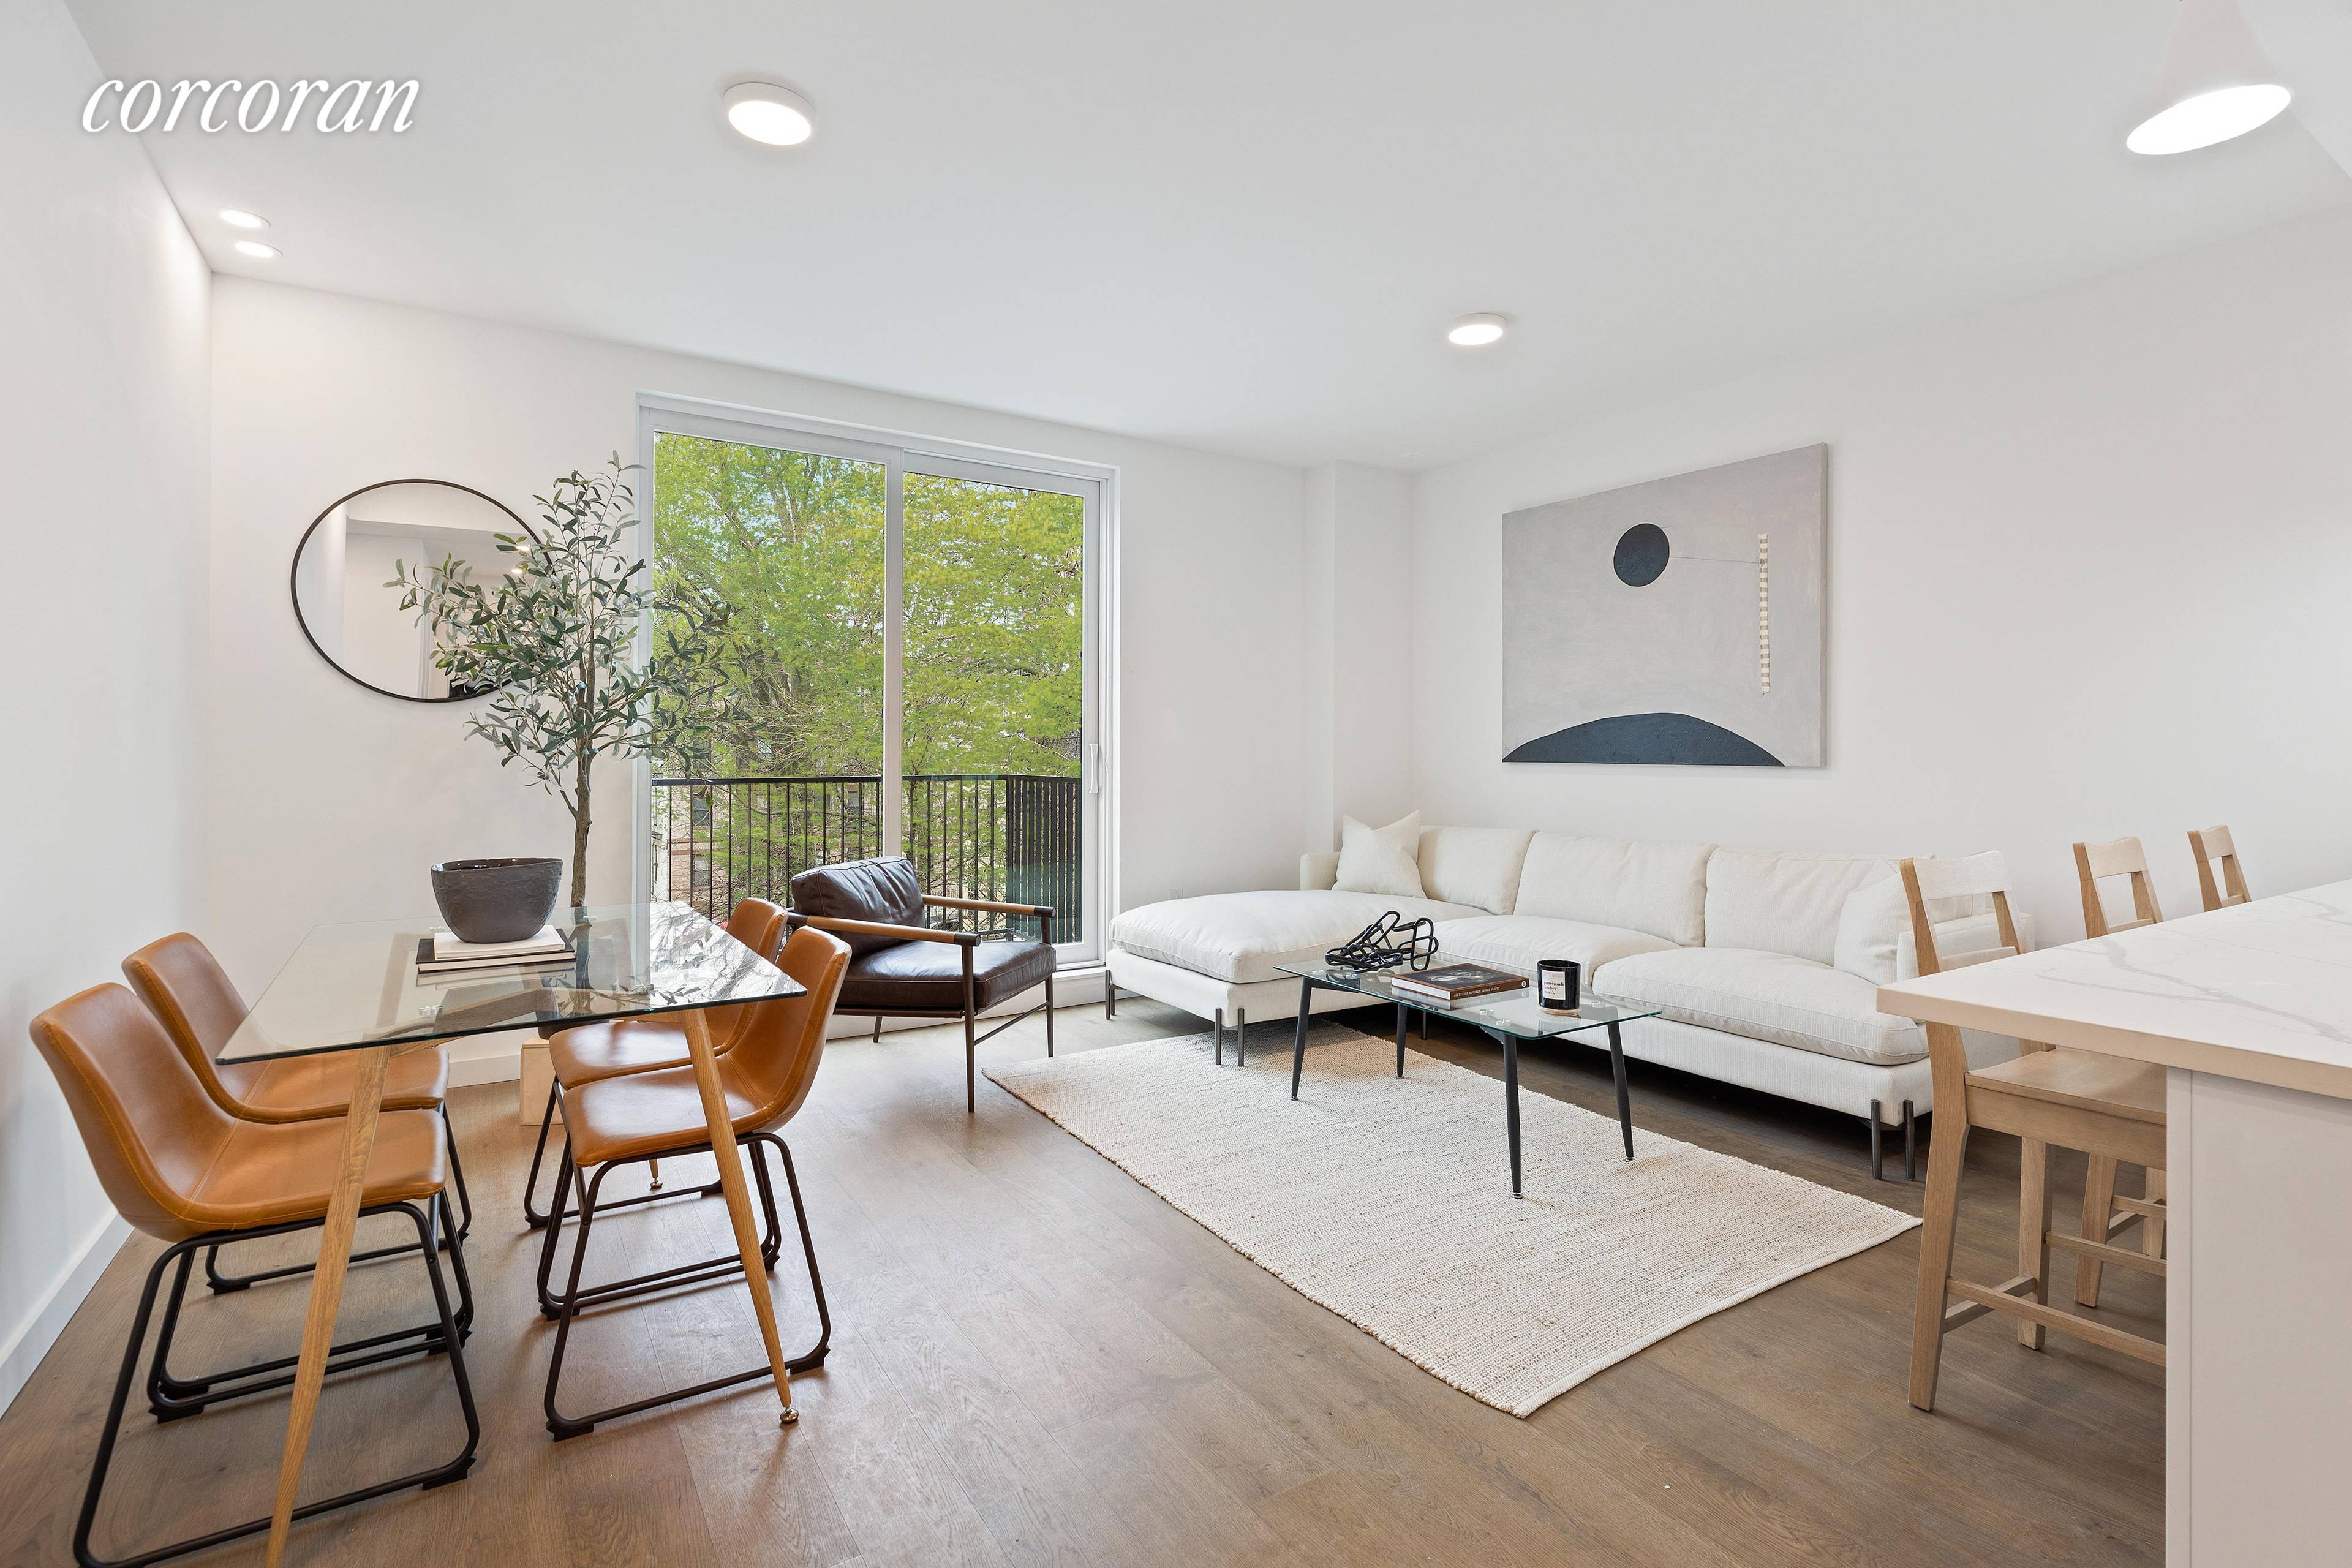 Welcome to 618 Monroe Street, a sophisticated, amenity rich 10 unit condominium located on the northern edge of historic Stuyvesant Heights in BrooklynA s Bedford Stuyvesant neighborhood.